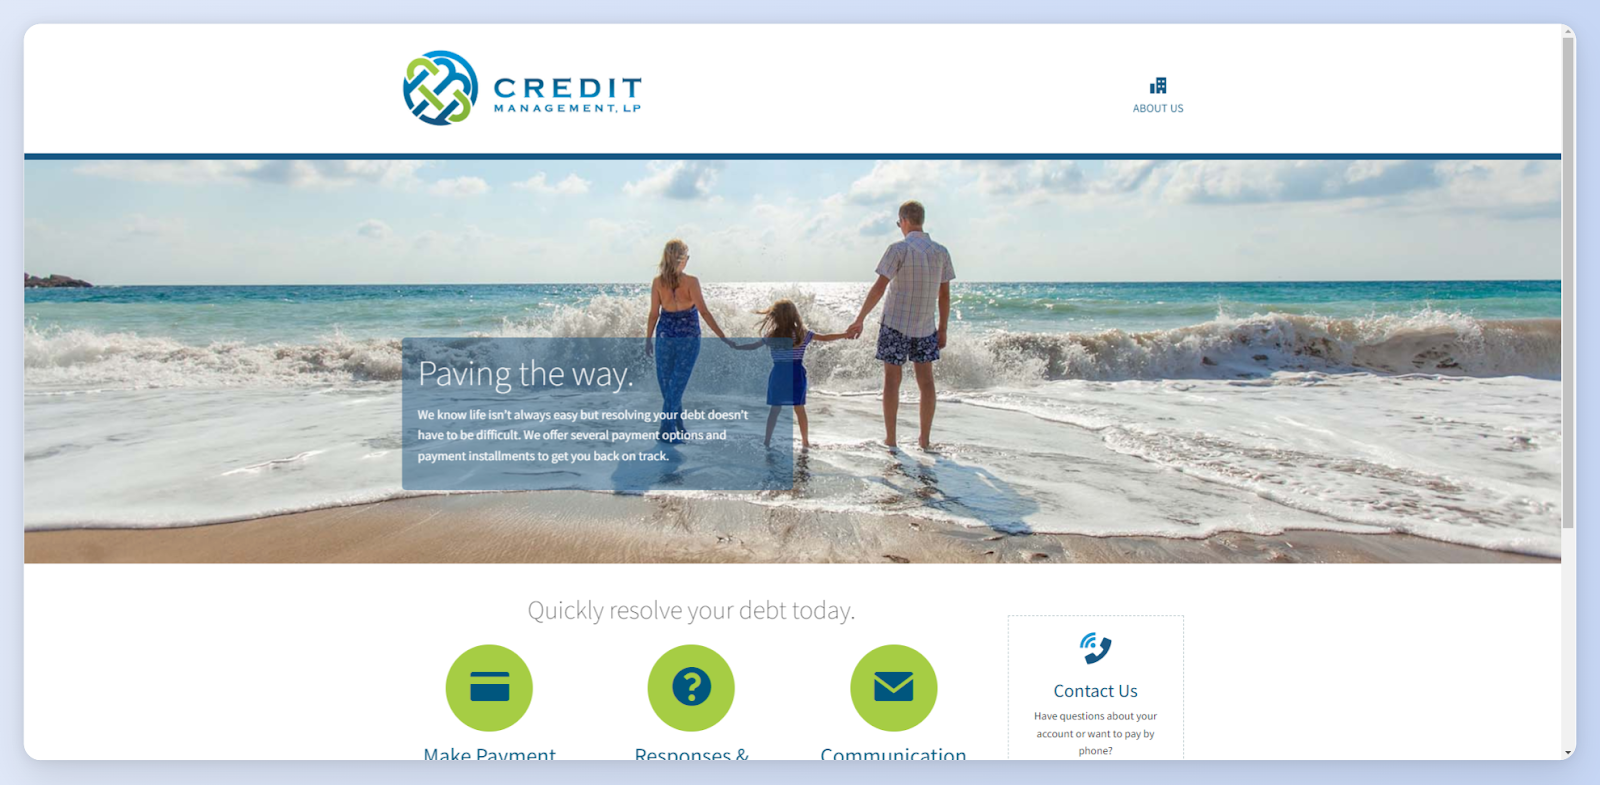 A screenshot of the Credit Management LP homepage